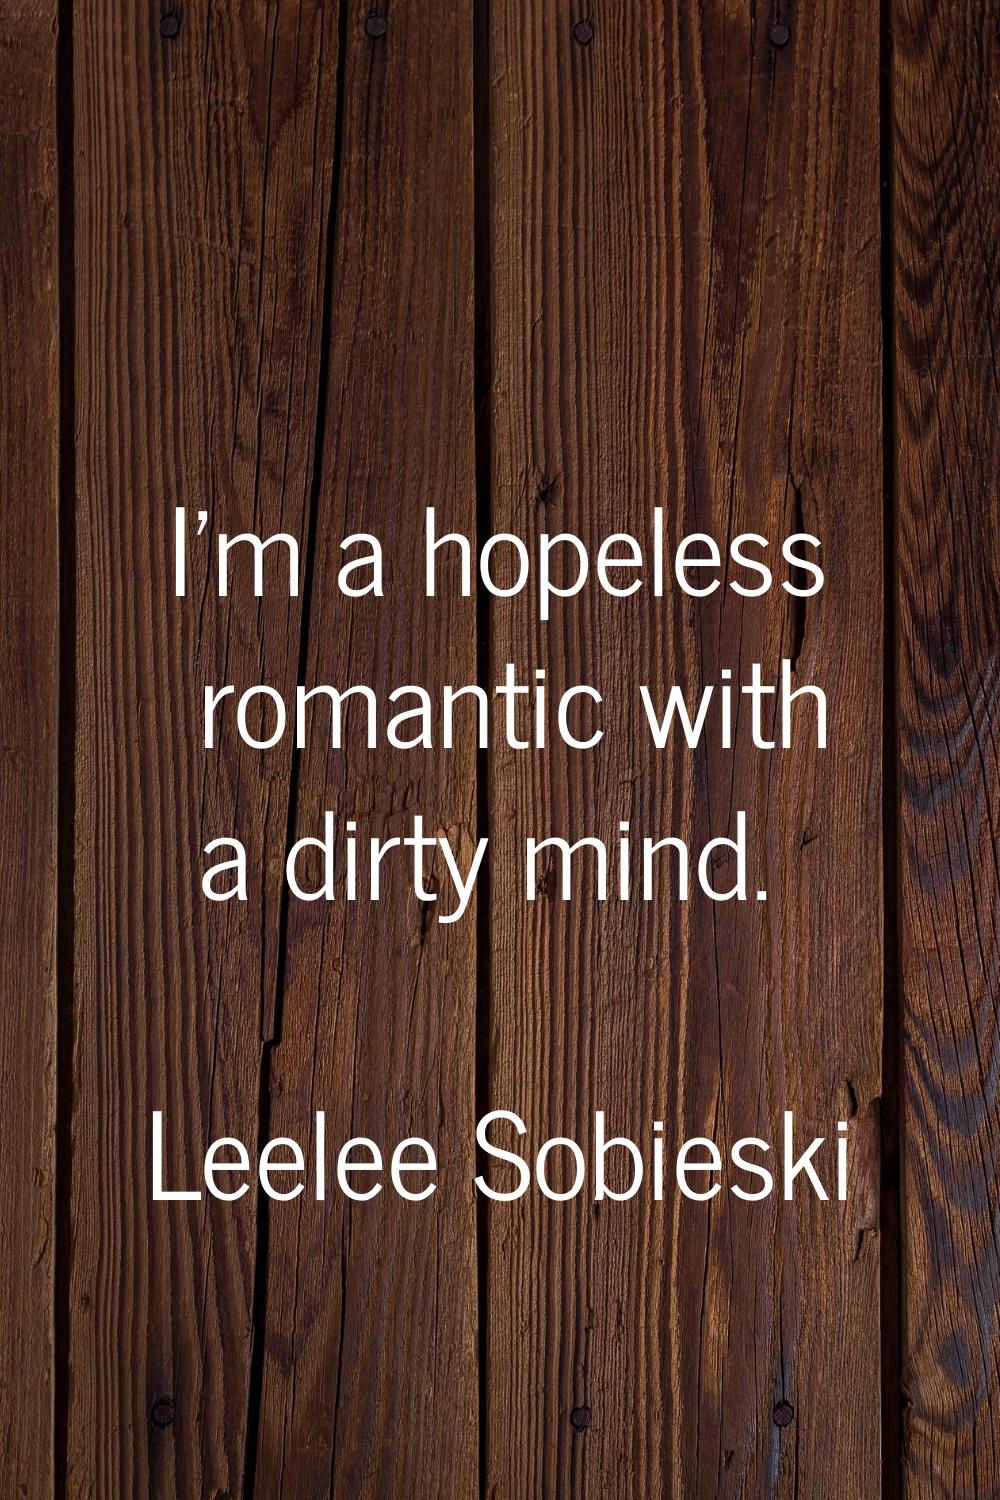 I'm a hopeless romantic with a dirty mind.